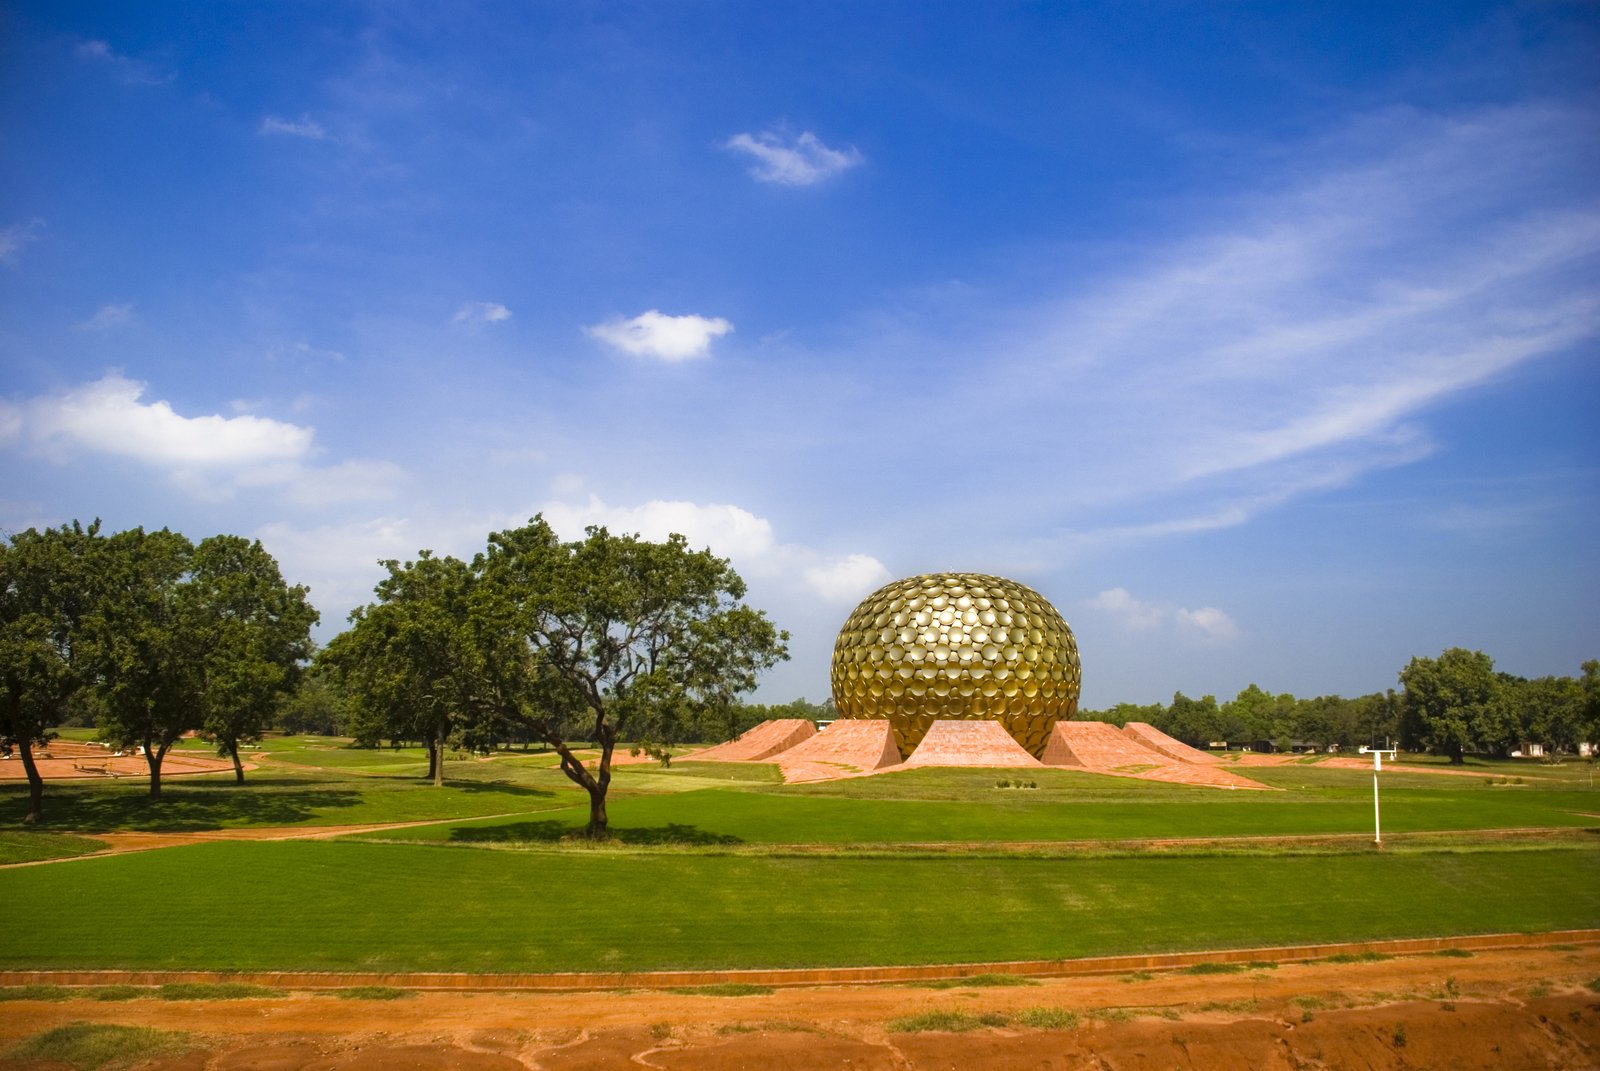 an outdoor golf course with large sphere shaped structure on one side and trees in the other